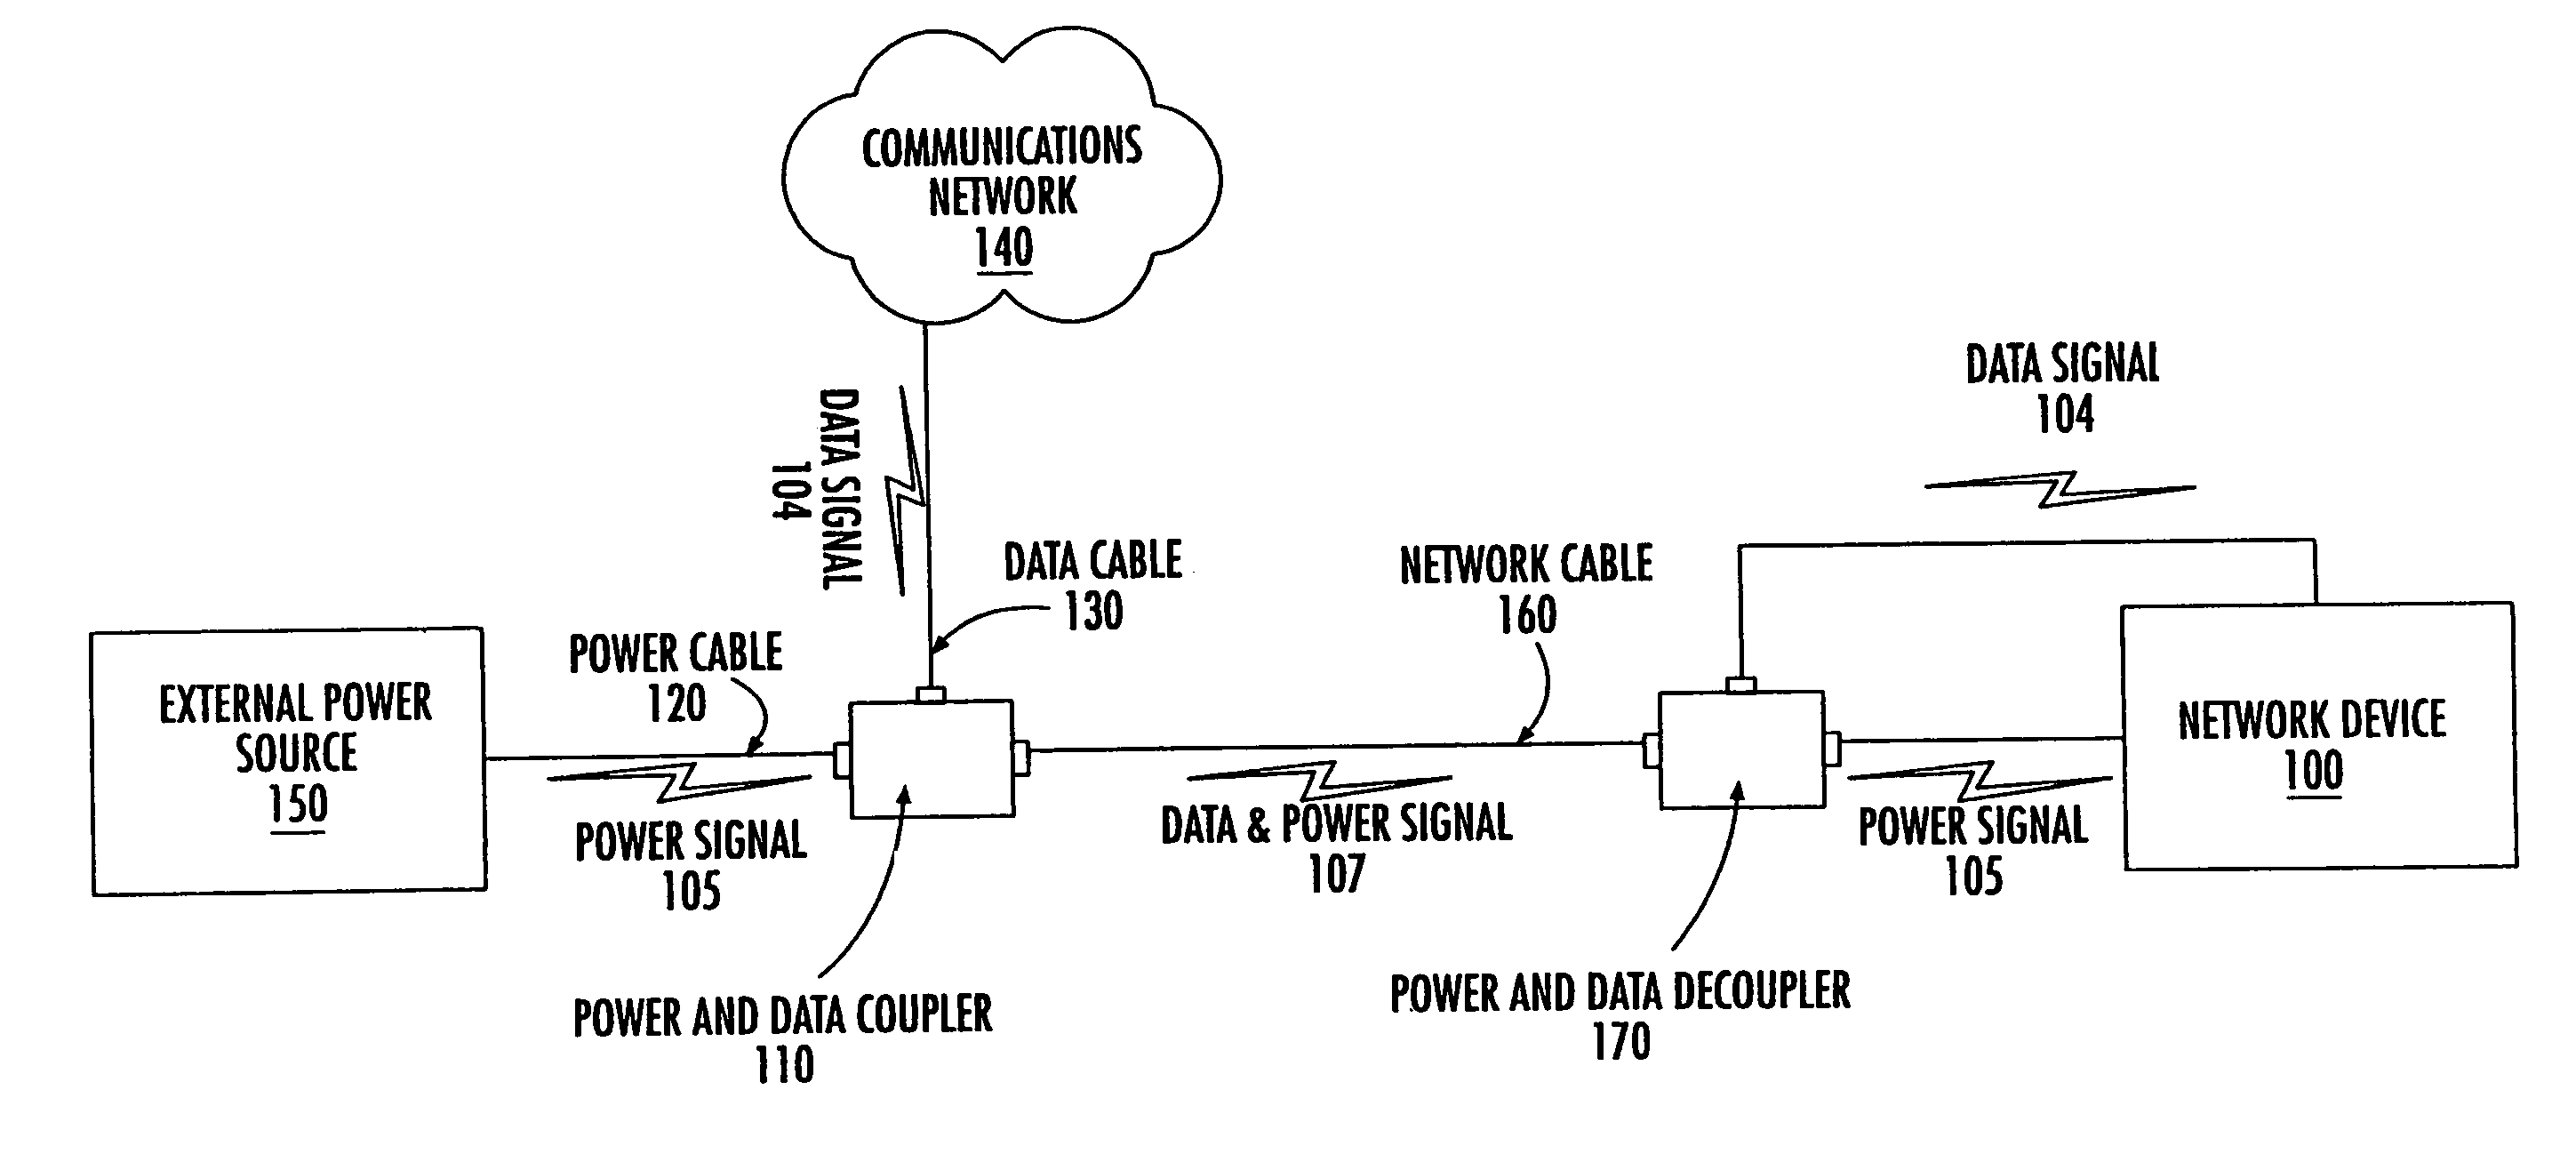 Power transfer apparatus for concurrently transmitting data and power over data wires